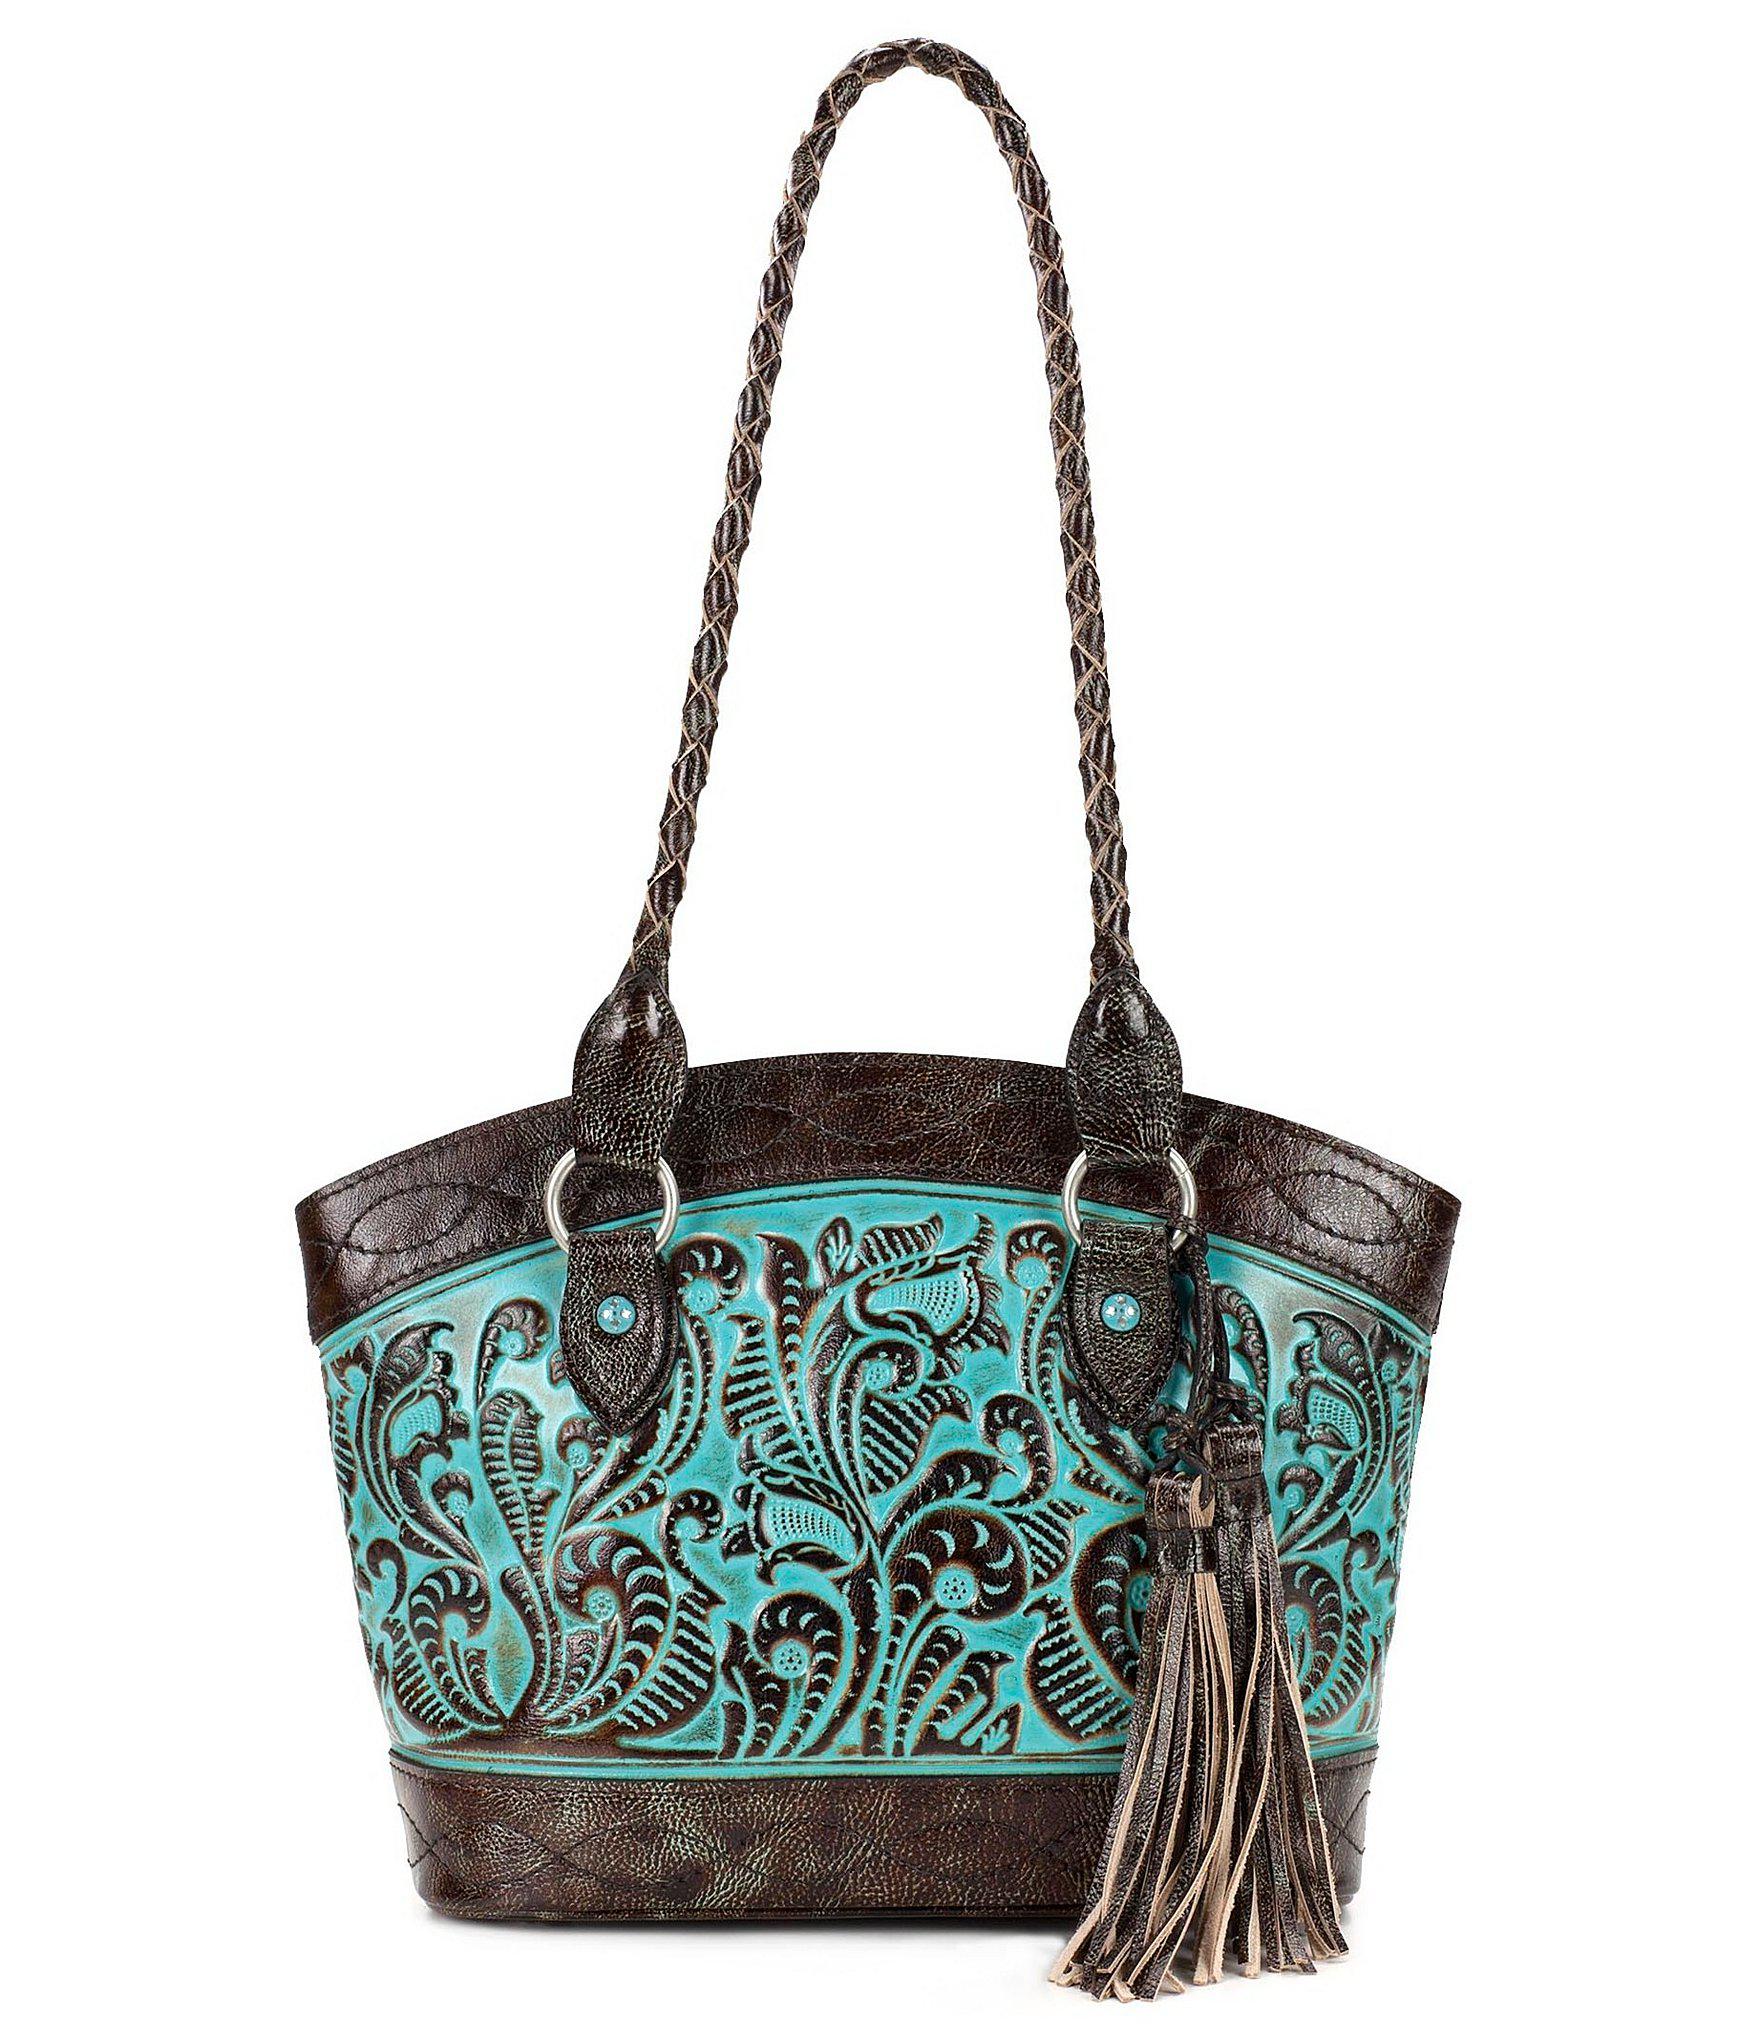 Patricia Nash Tooled Turquoise Collection Zorita Tasseled Floral